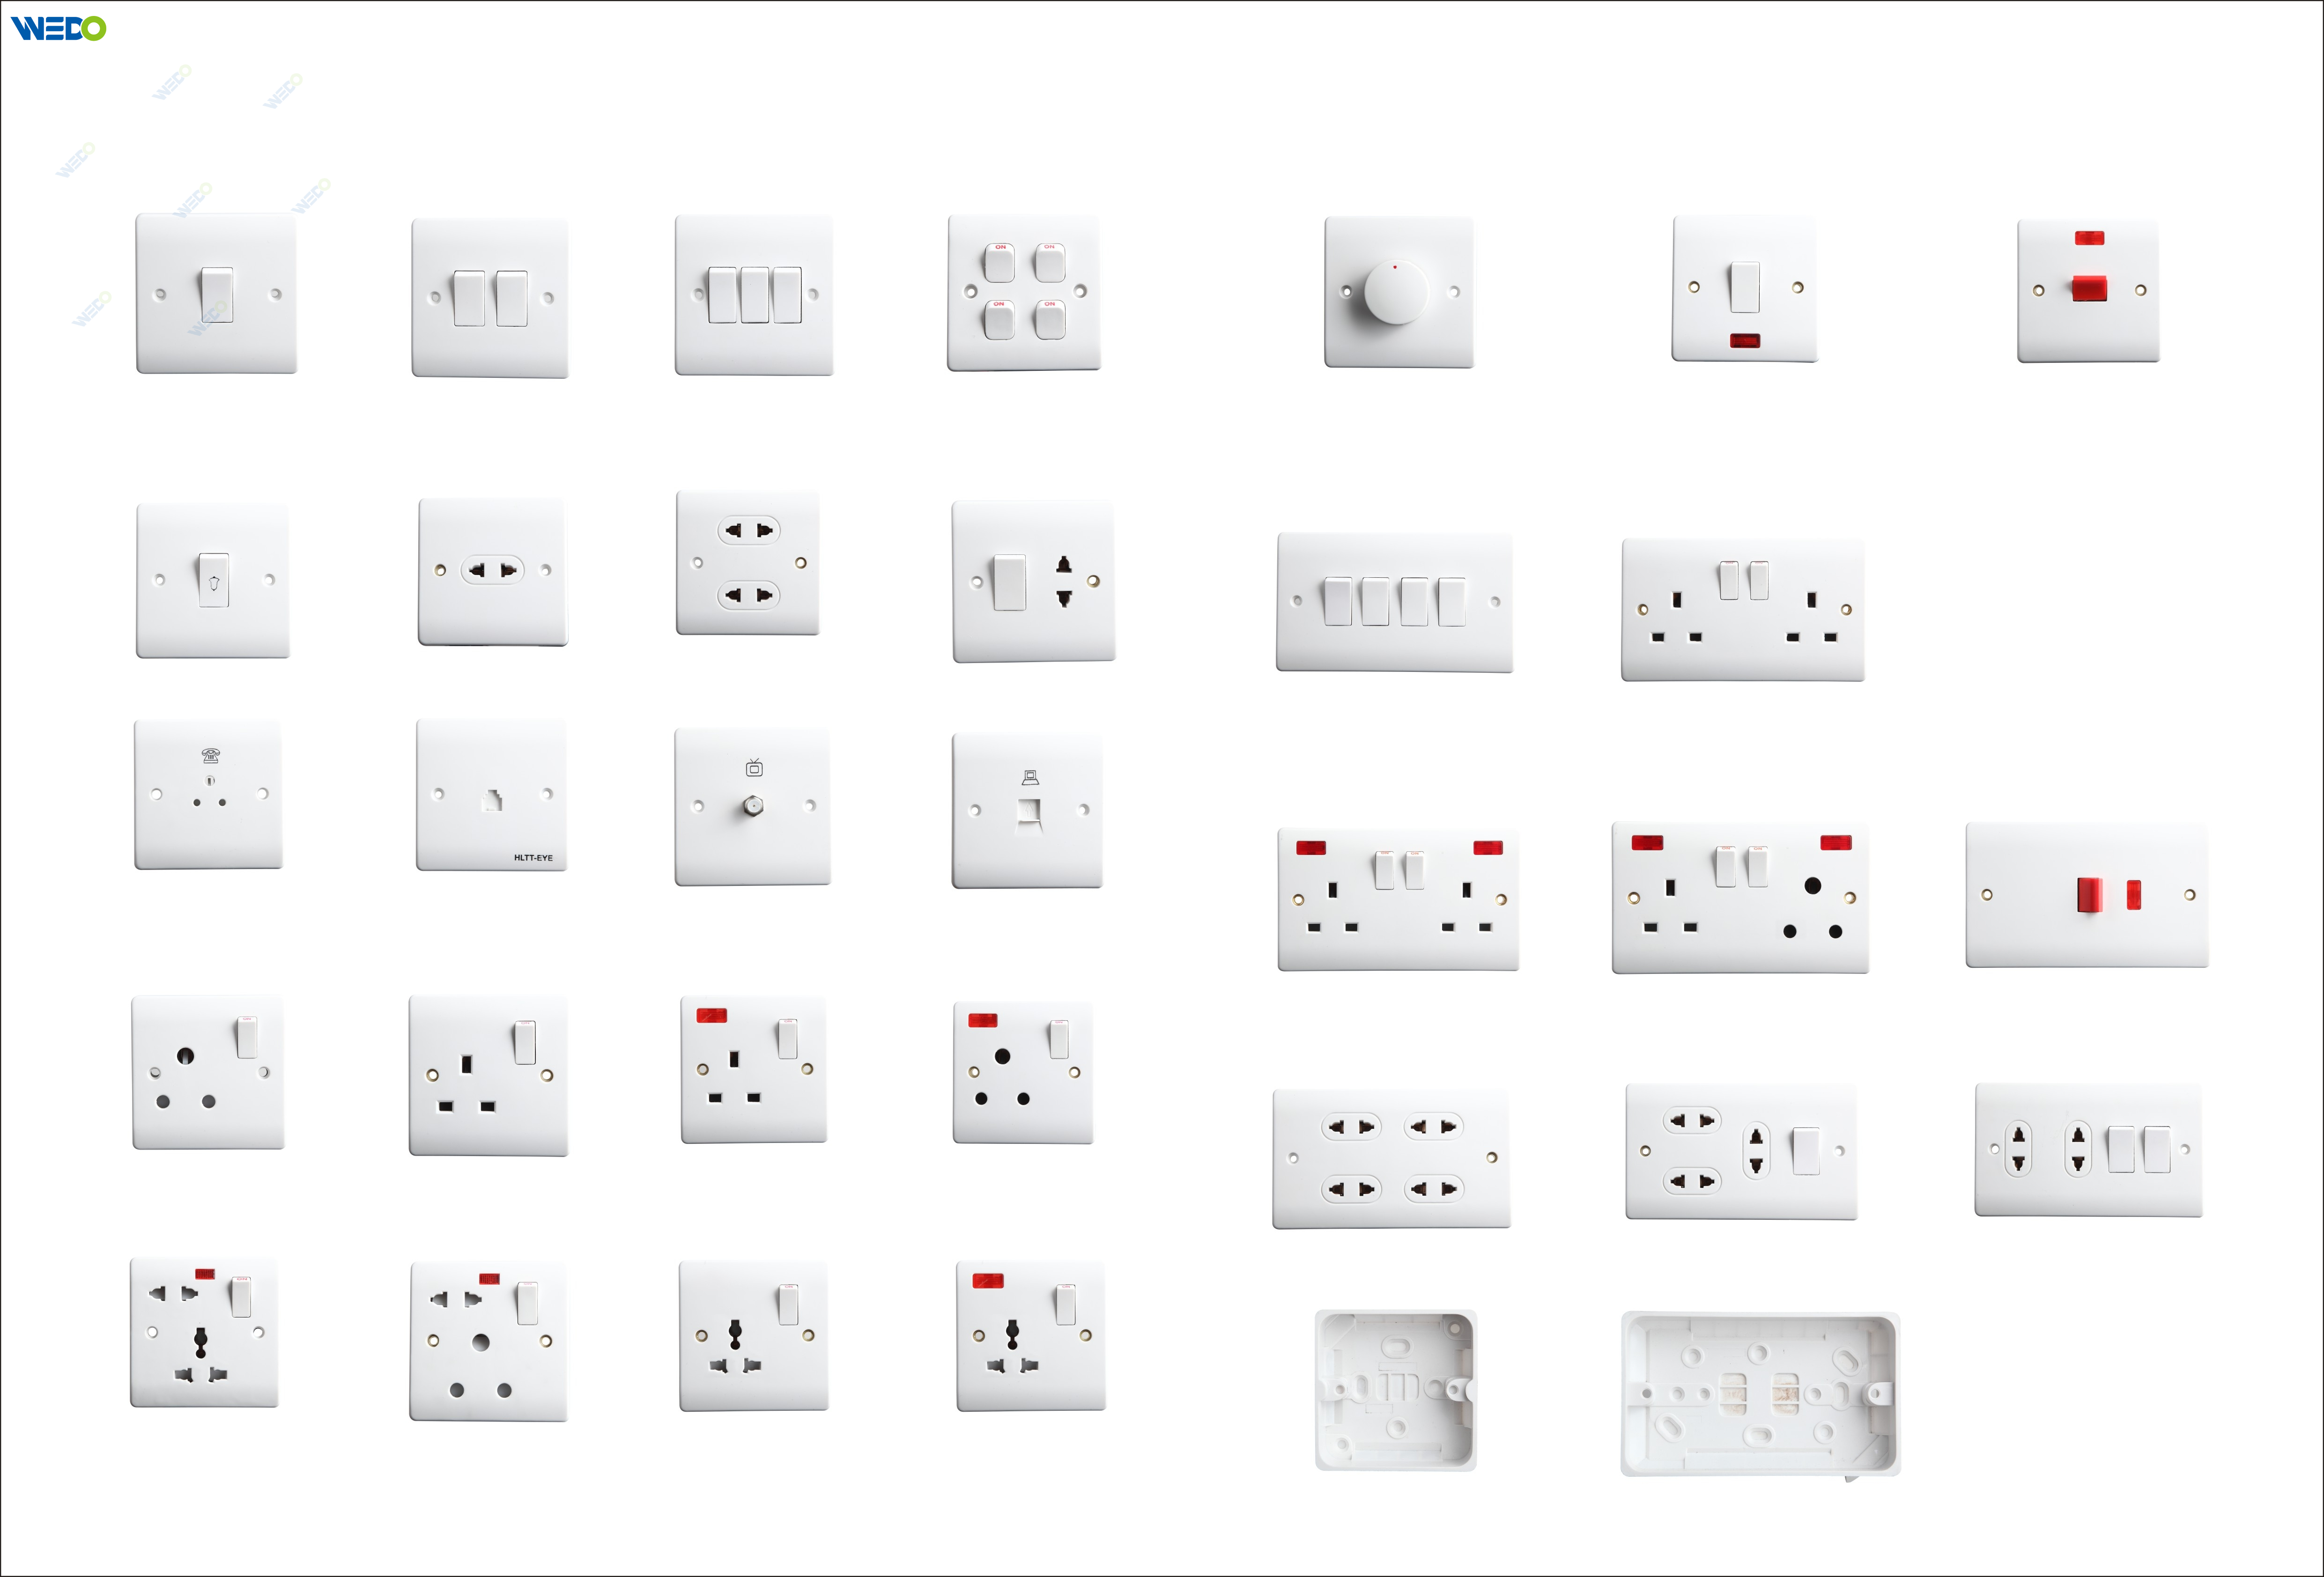 English Standard 15A +16A 1 Gang Switched Home Light Socket